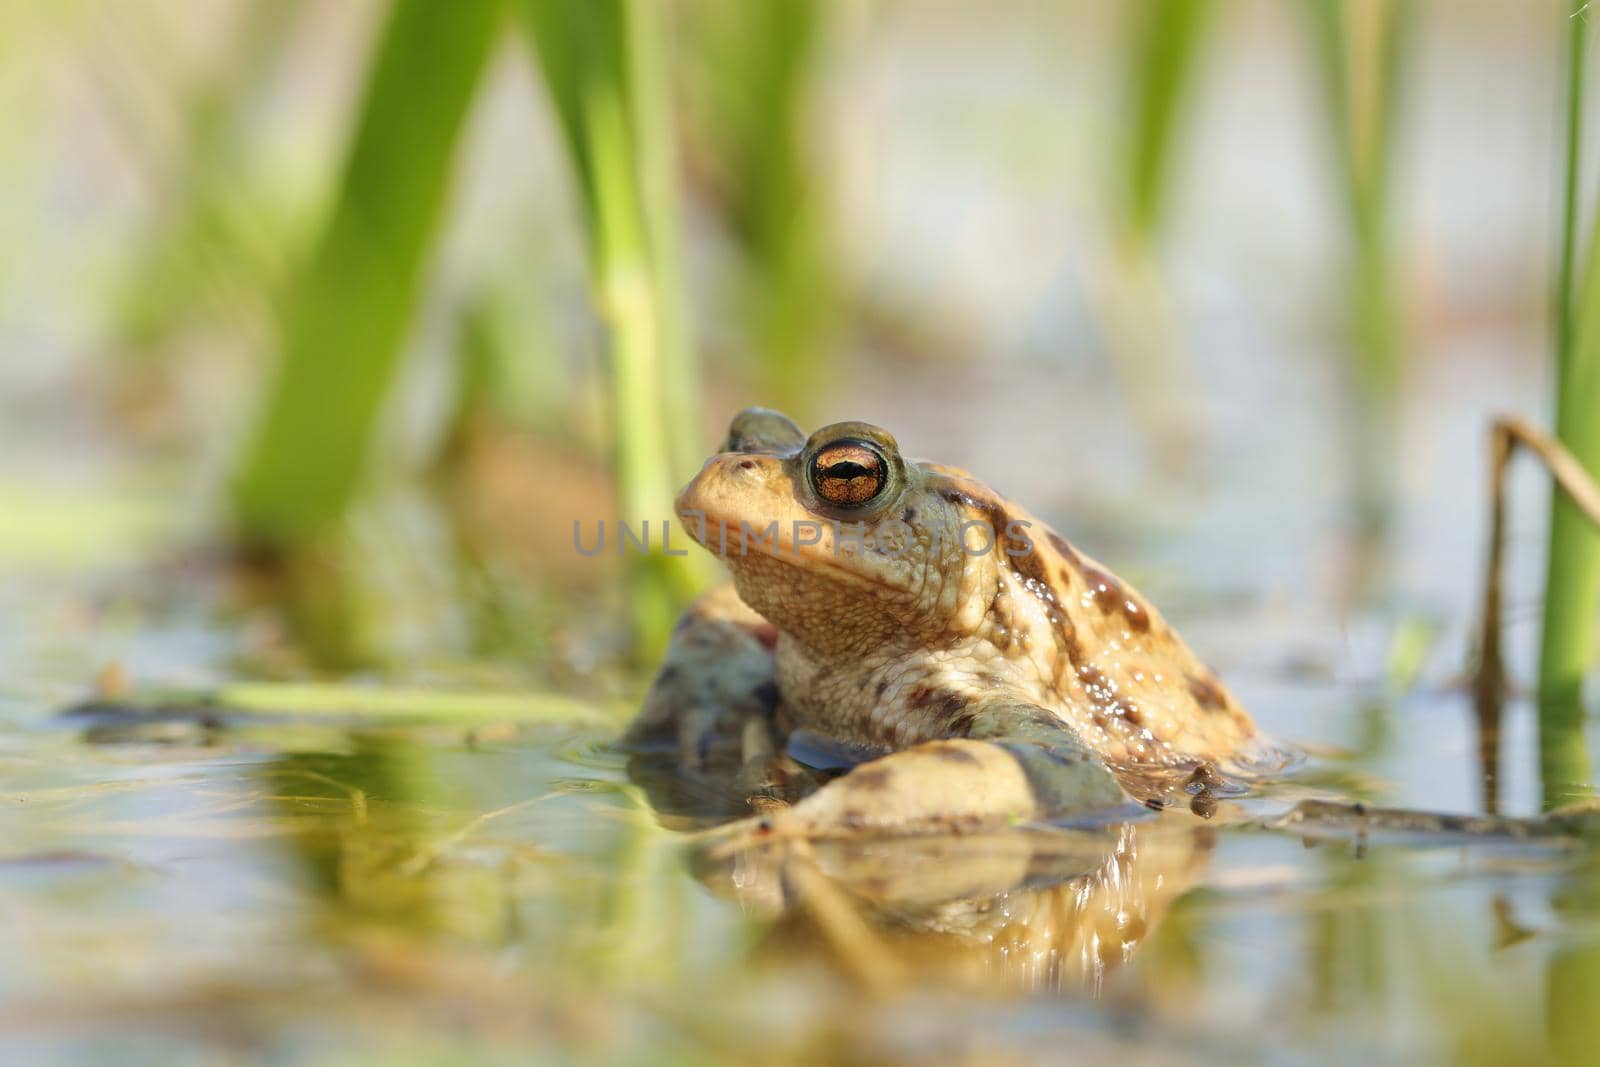 Frog in a pond by nature78